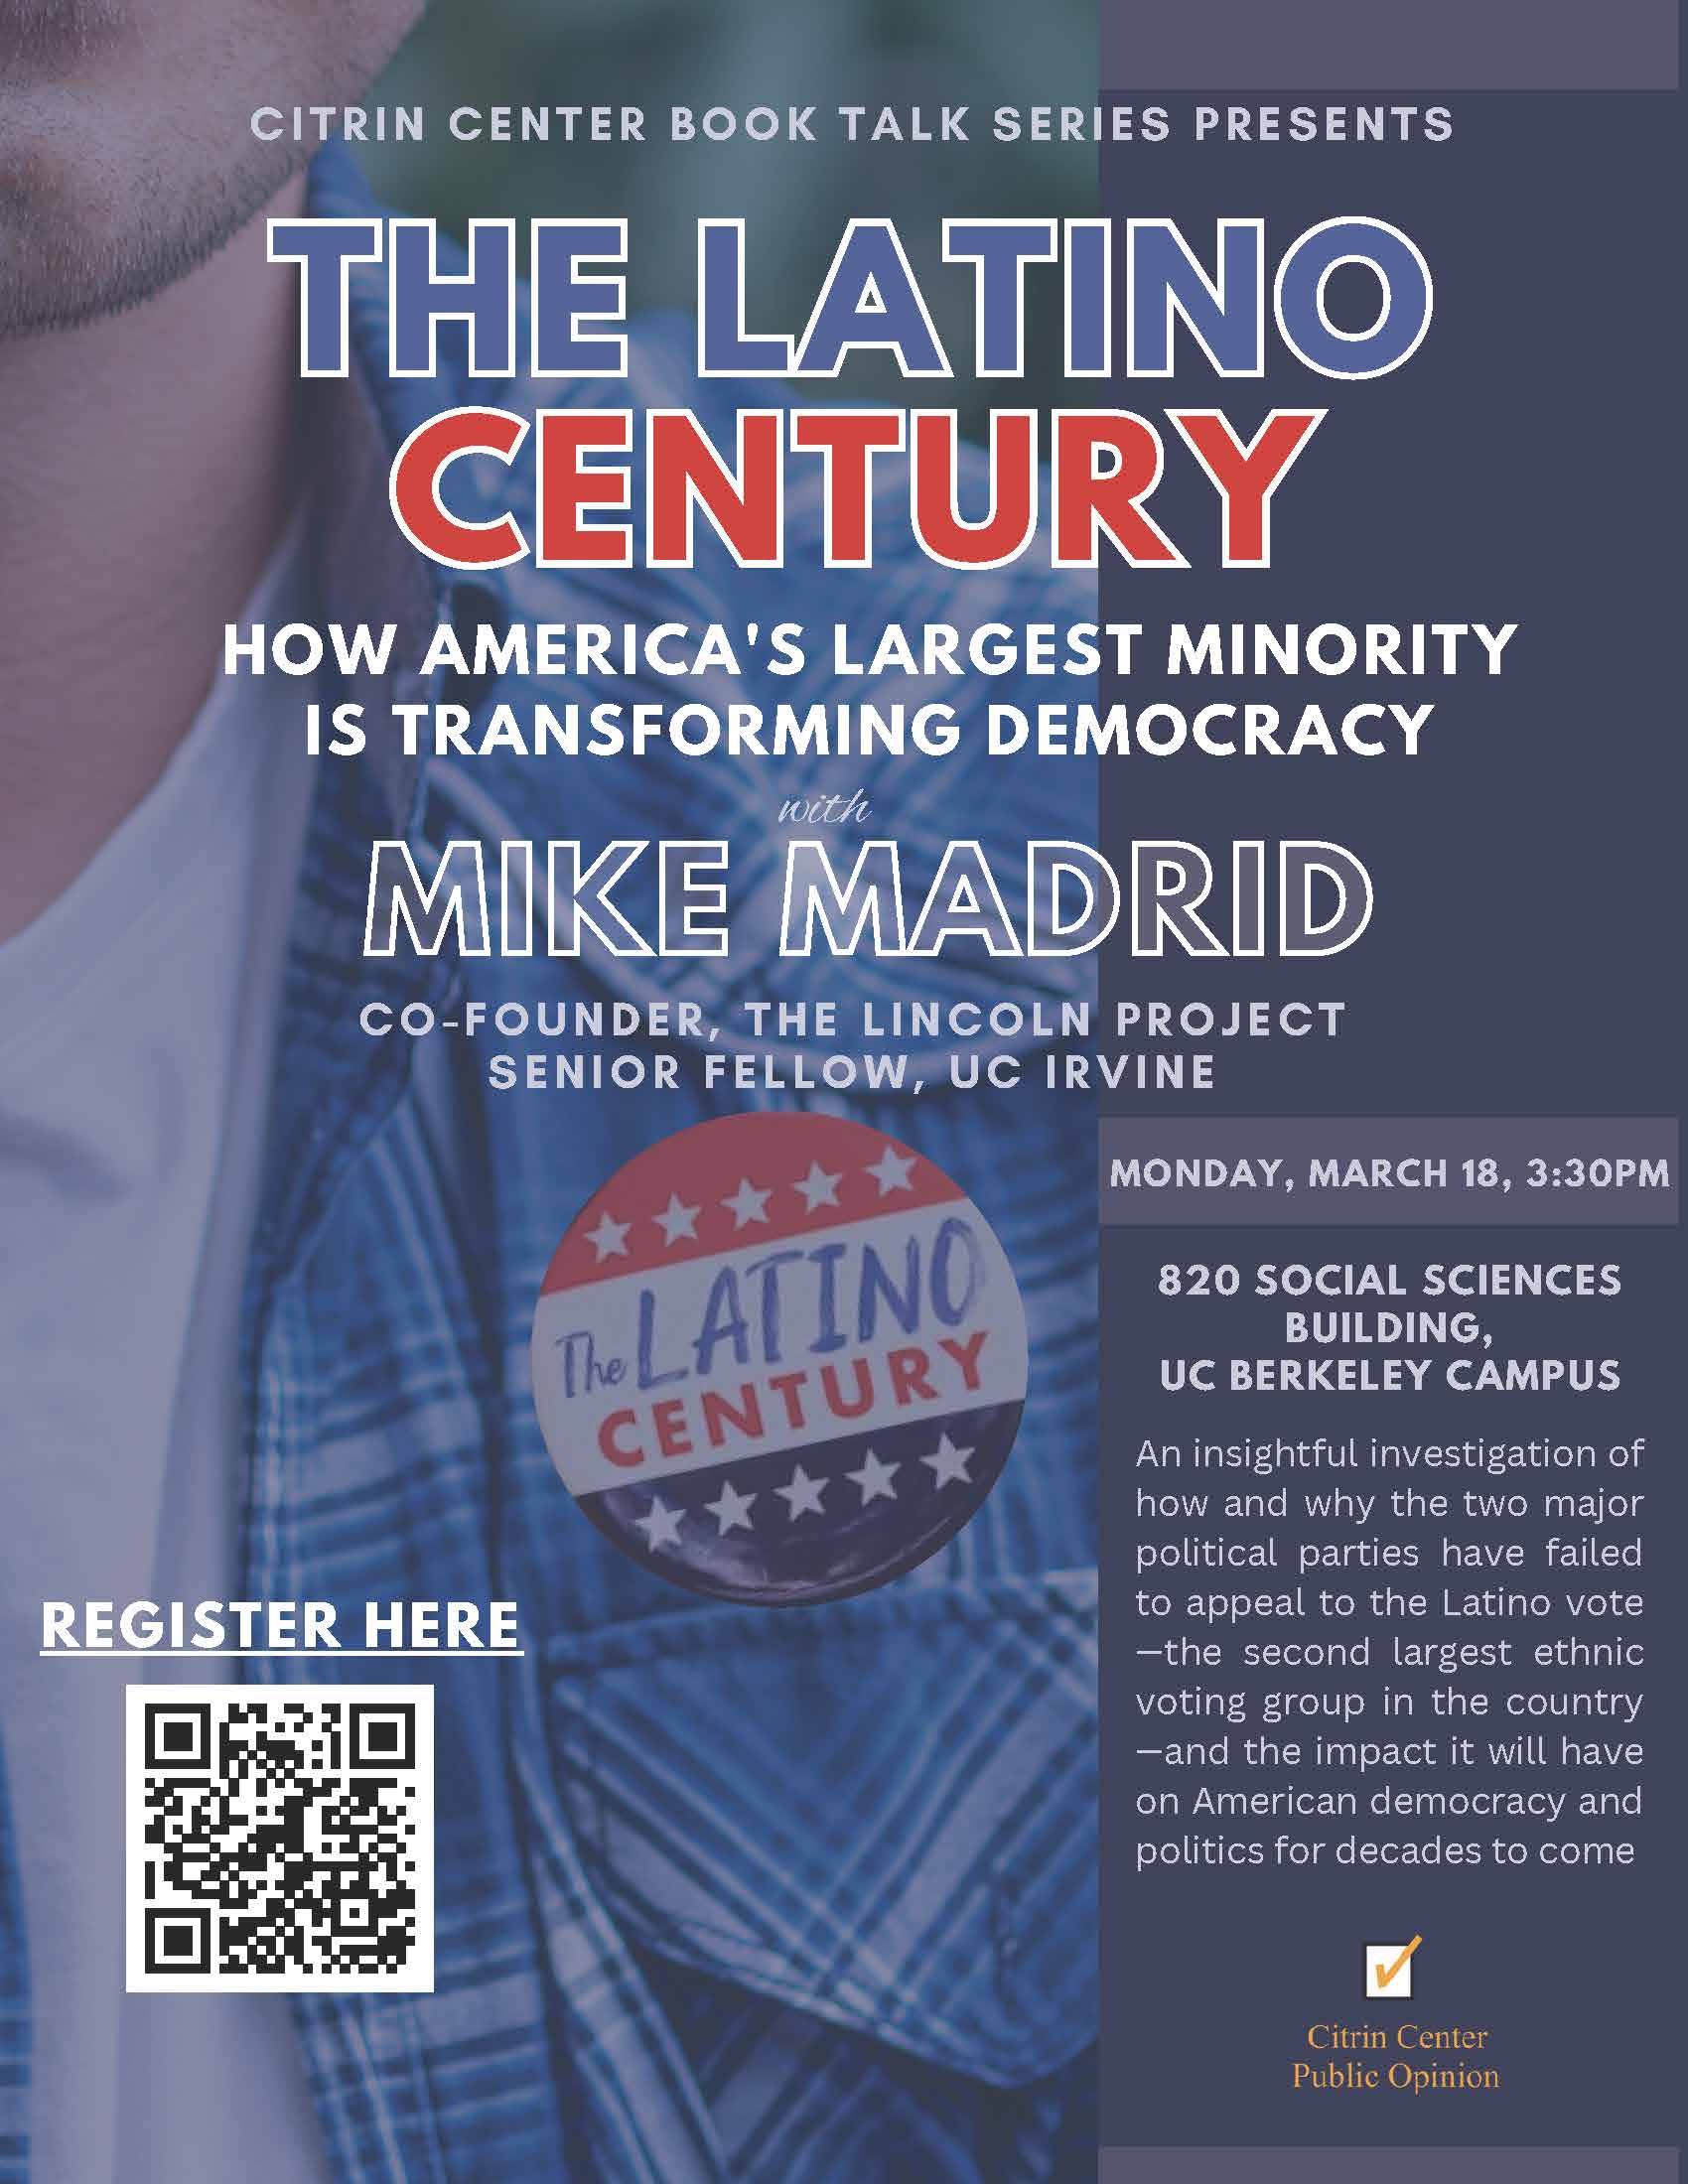 Flyer for book talk the Latino Century: How America's Largest Minority is Transforming Democracy